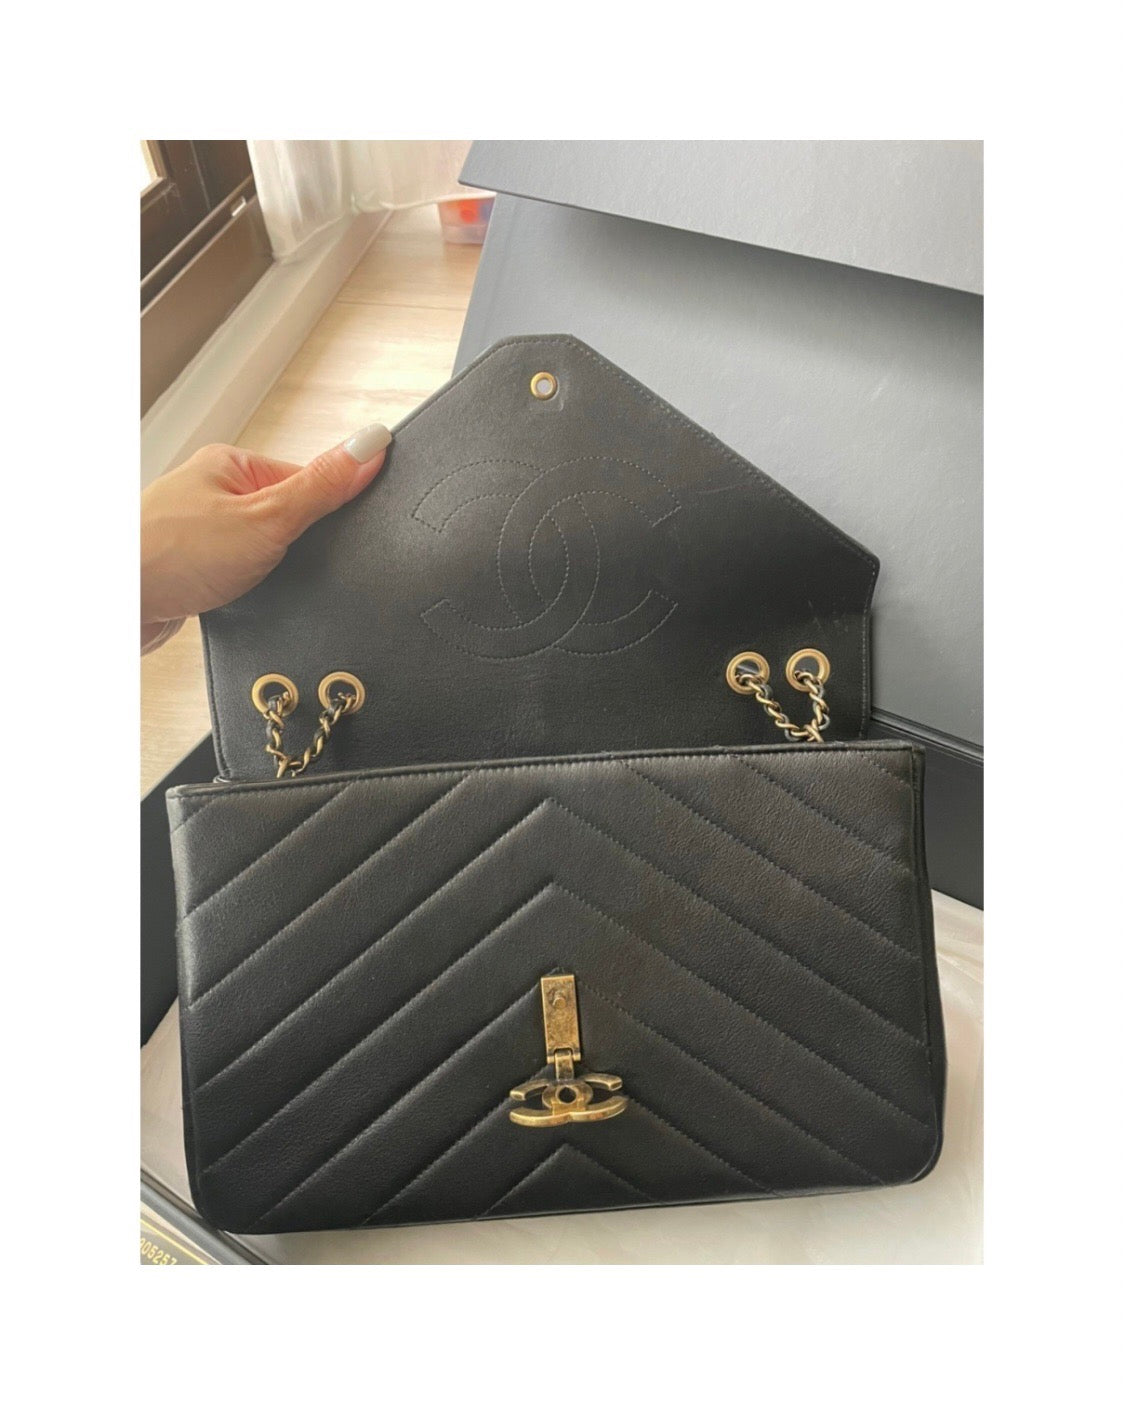 Chanel Coco Envelope Flap Bag 黑金山形紋雙鏈信封包 - STAY PURE